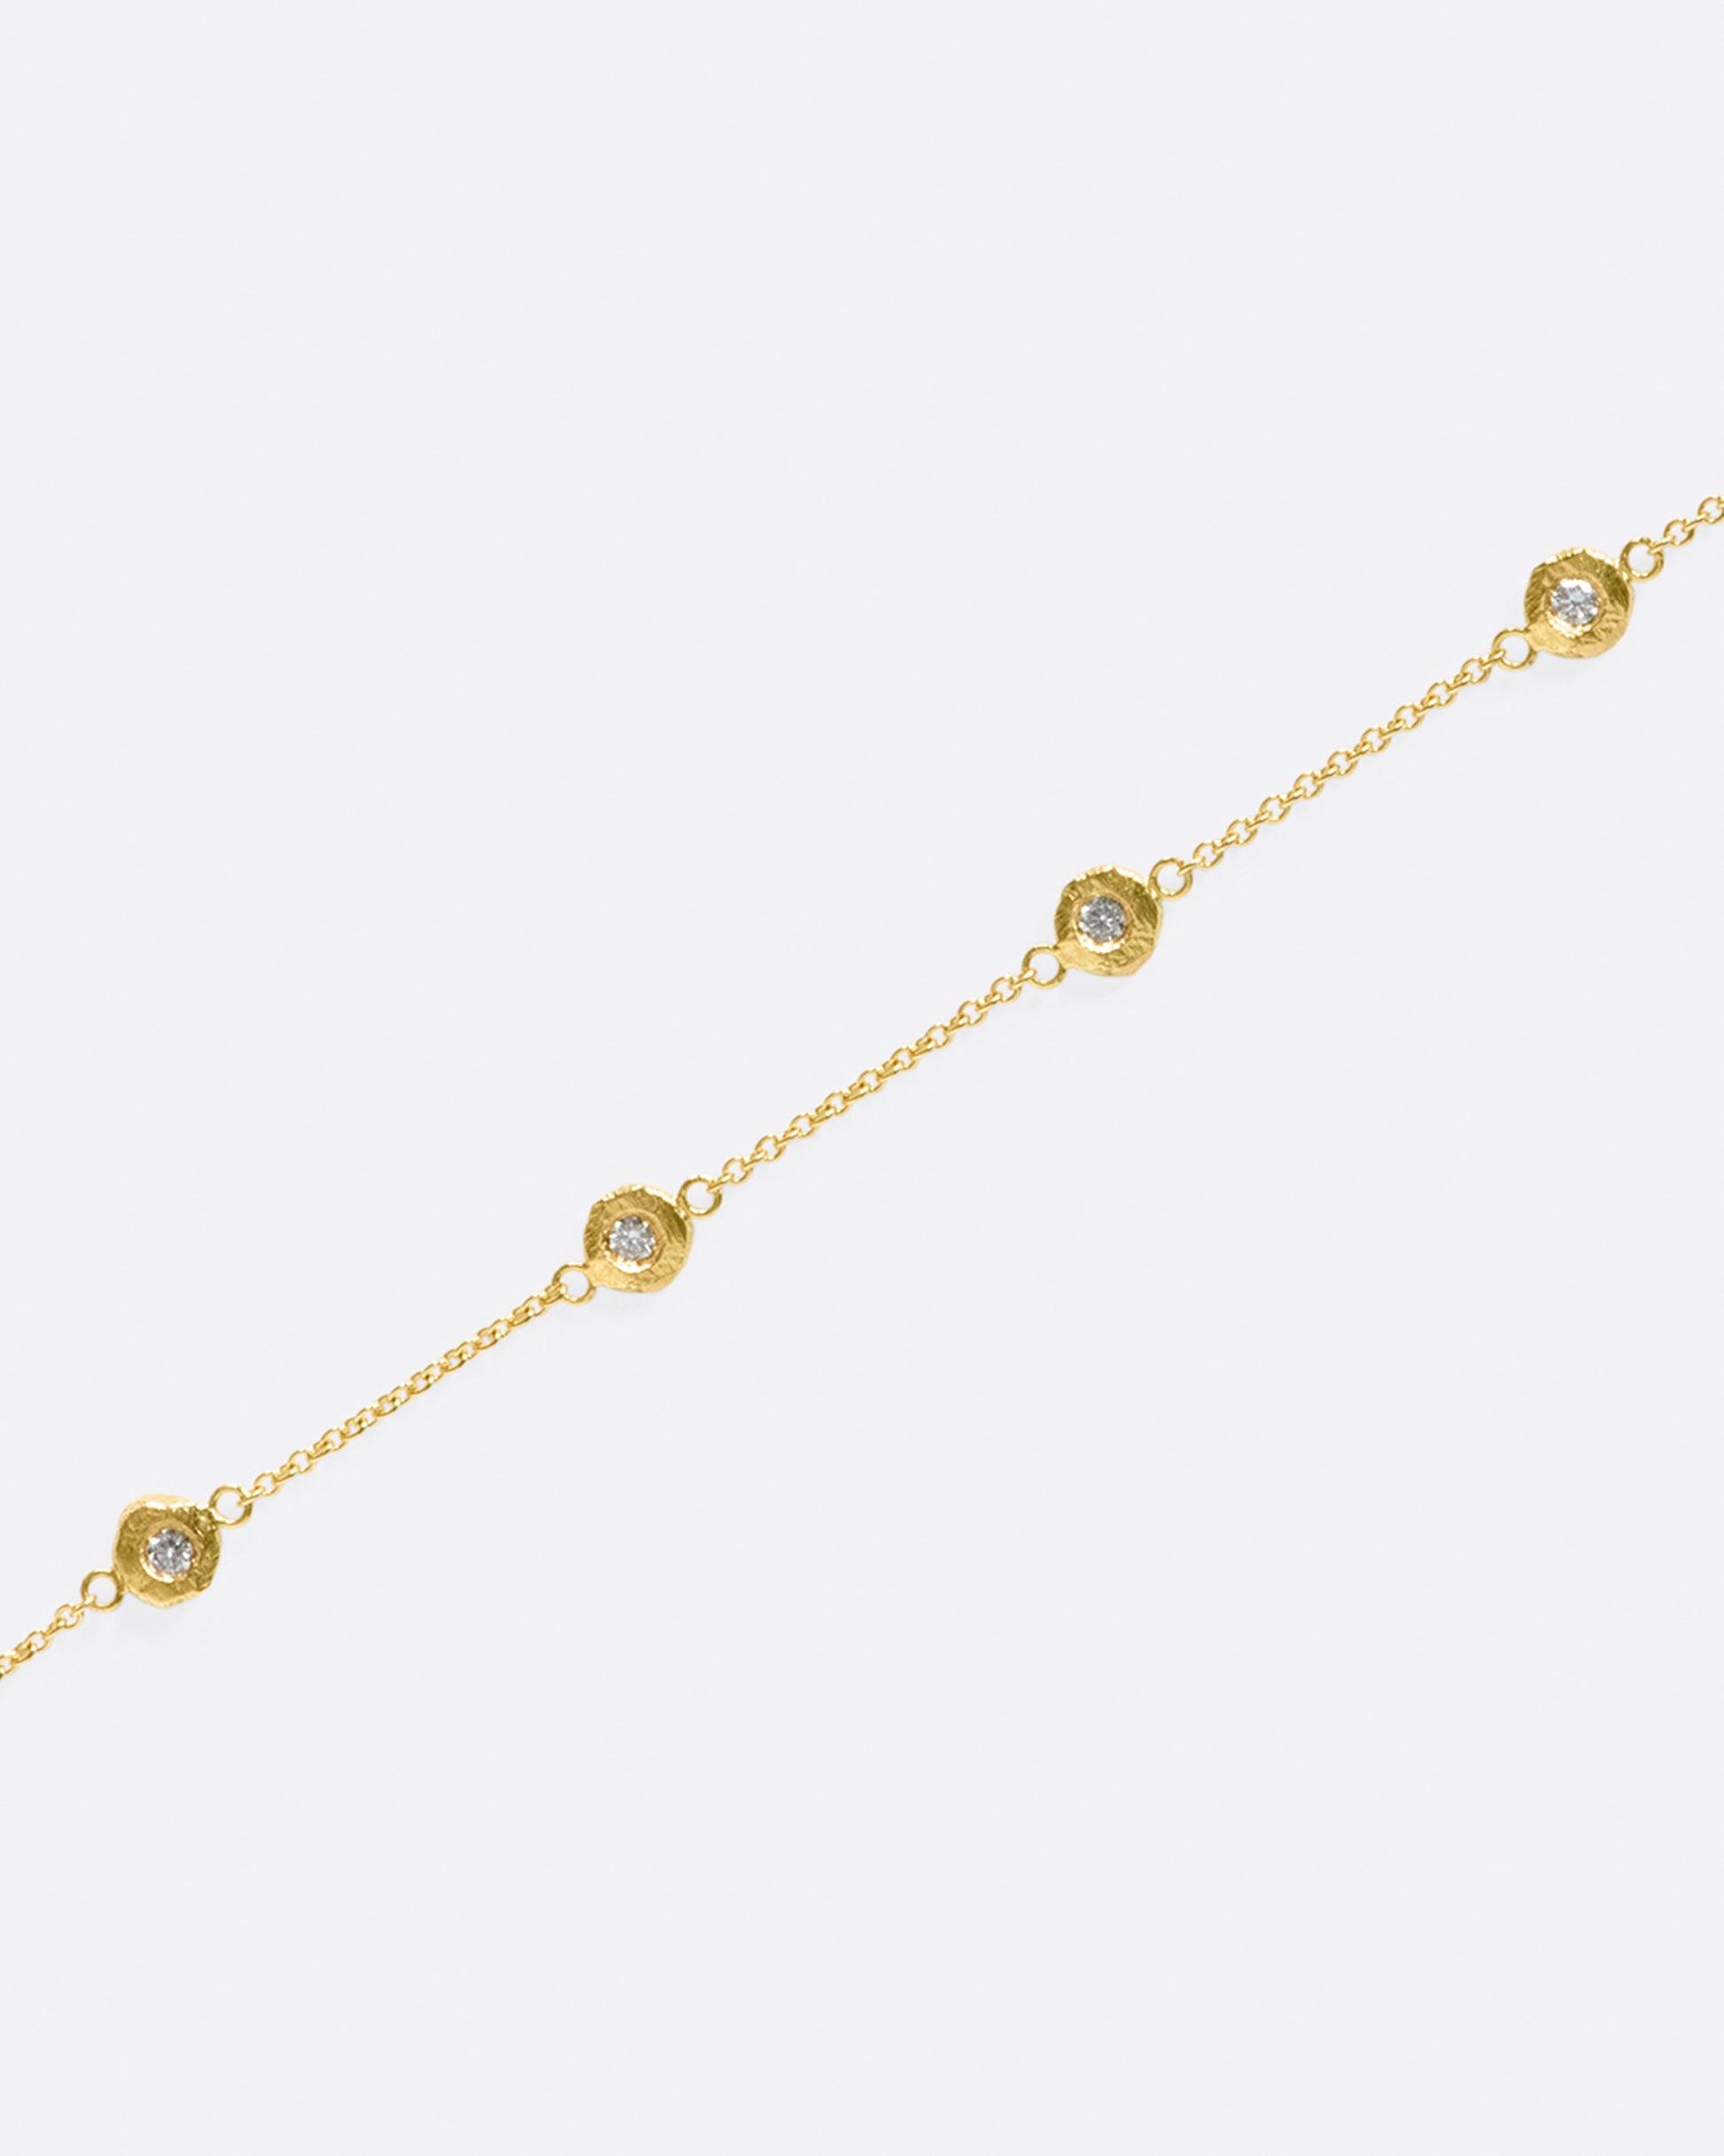 A handmade take on a classic style; this chain bracelet has five diamonds set in hand carved bezels, a bit over an inch apart.